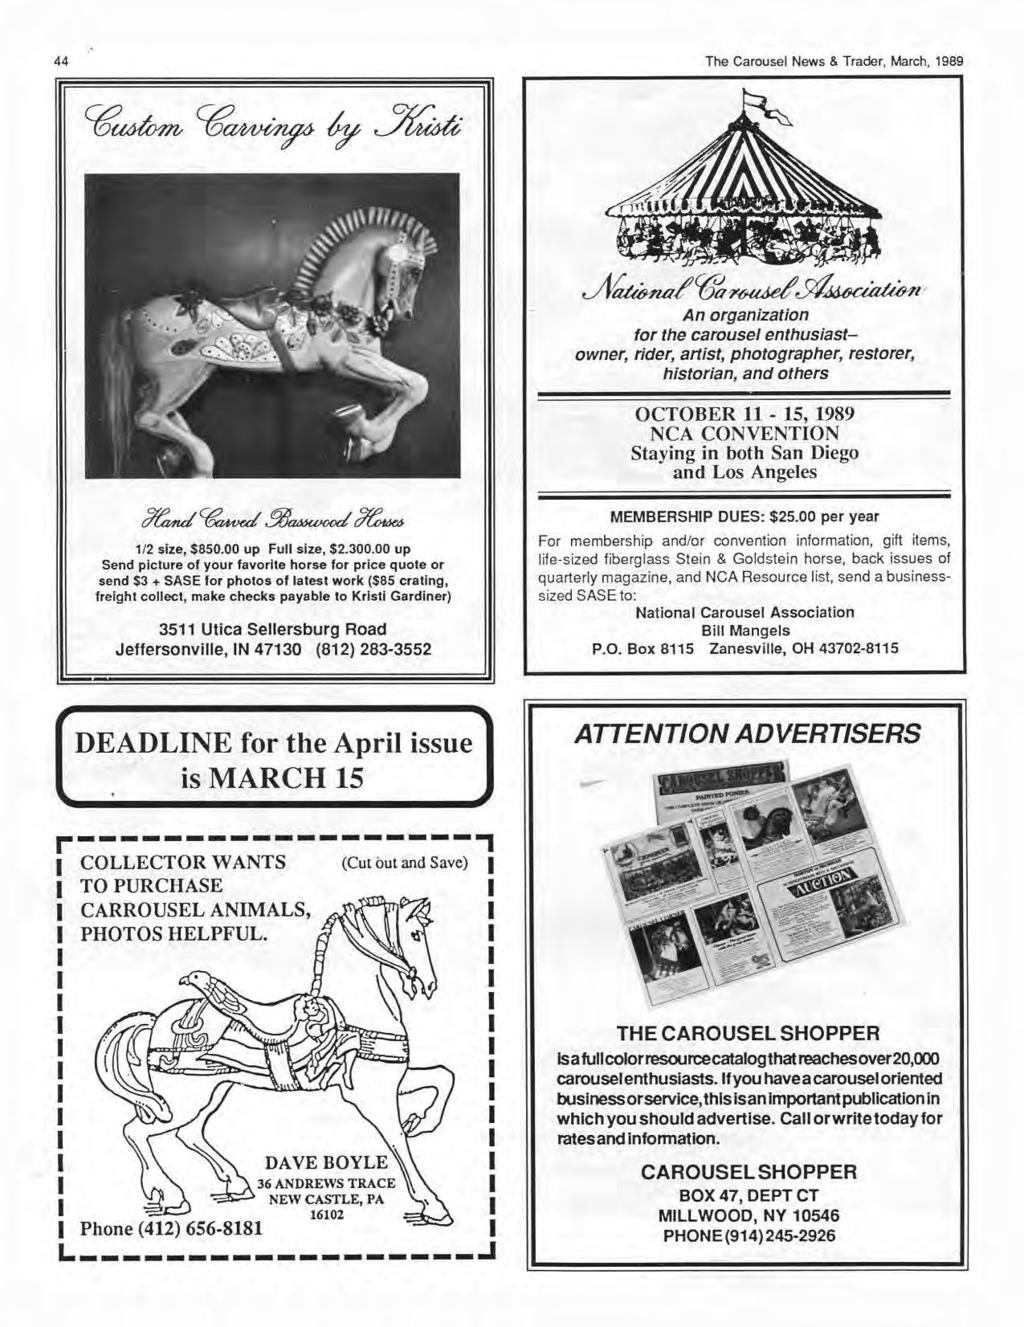 44 The Carousel News & Trader, March, 1989 JYtWMzo/~~sf/~l ' An organization for the carousel enthusiastowner, rider, artist, photographer, restorer, historian, and others OCTOBER 11-15, 1989 NCA